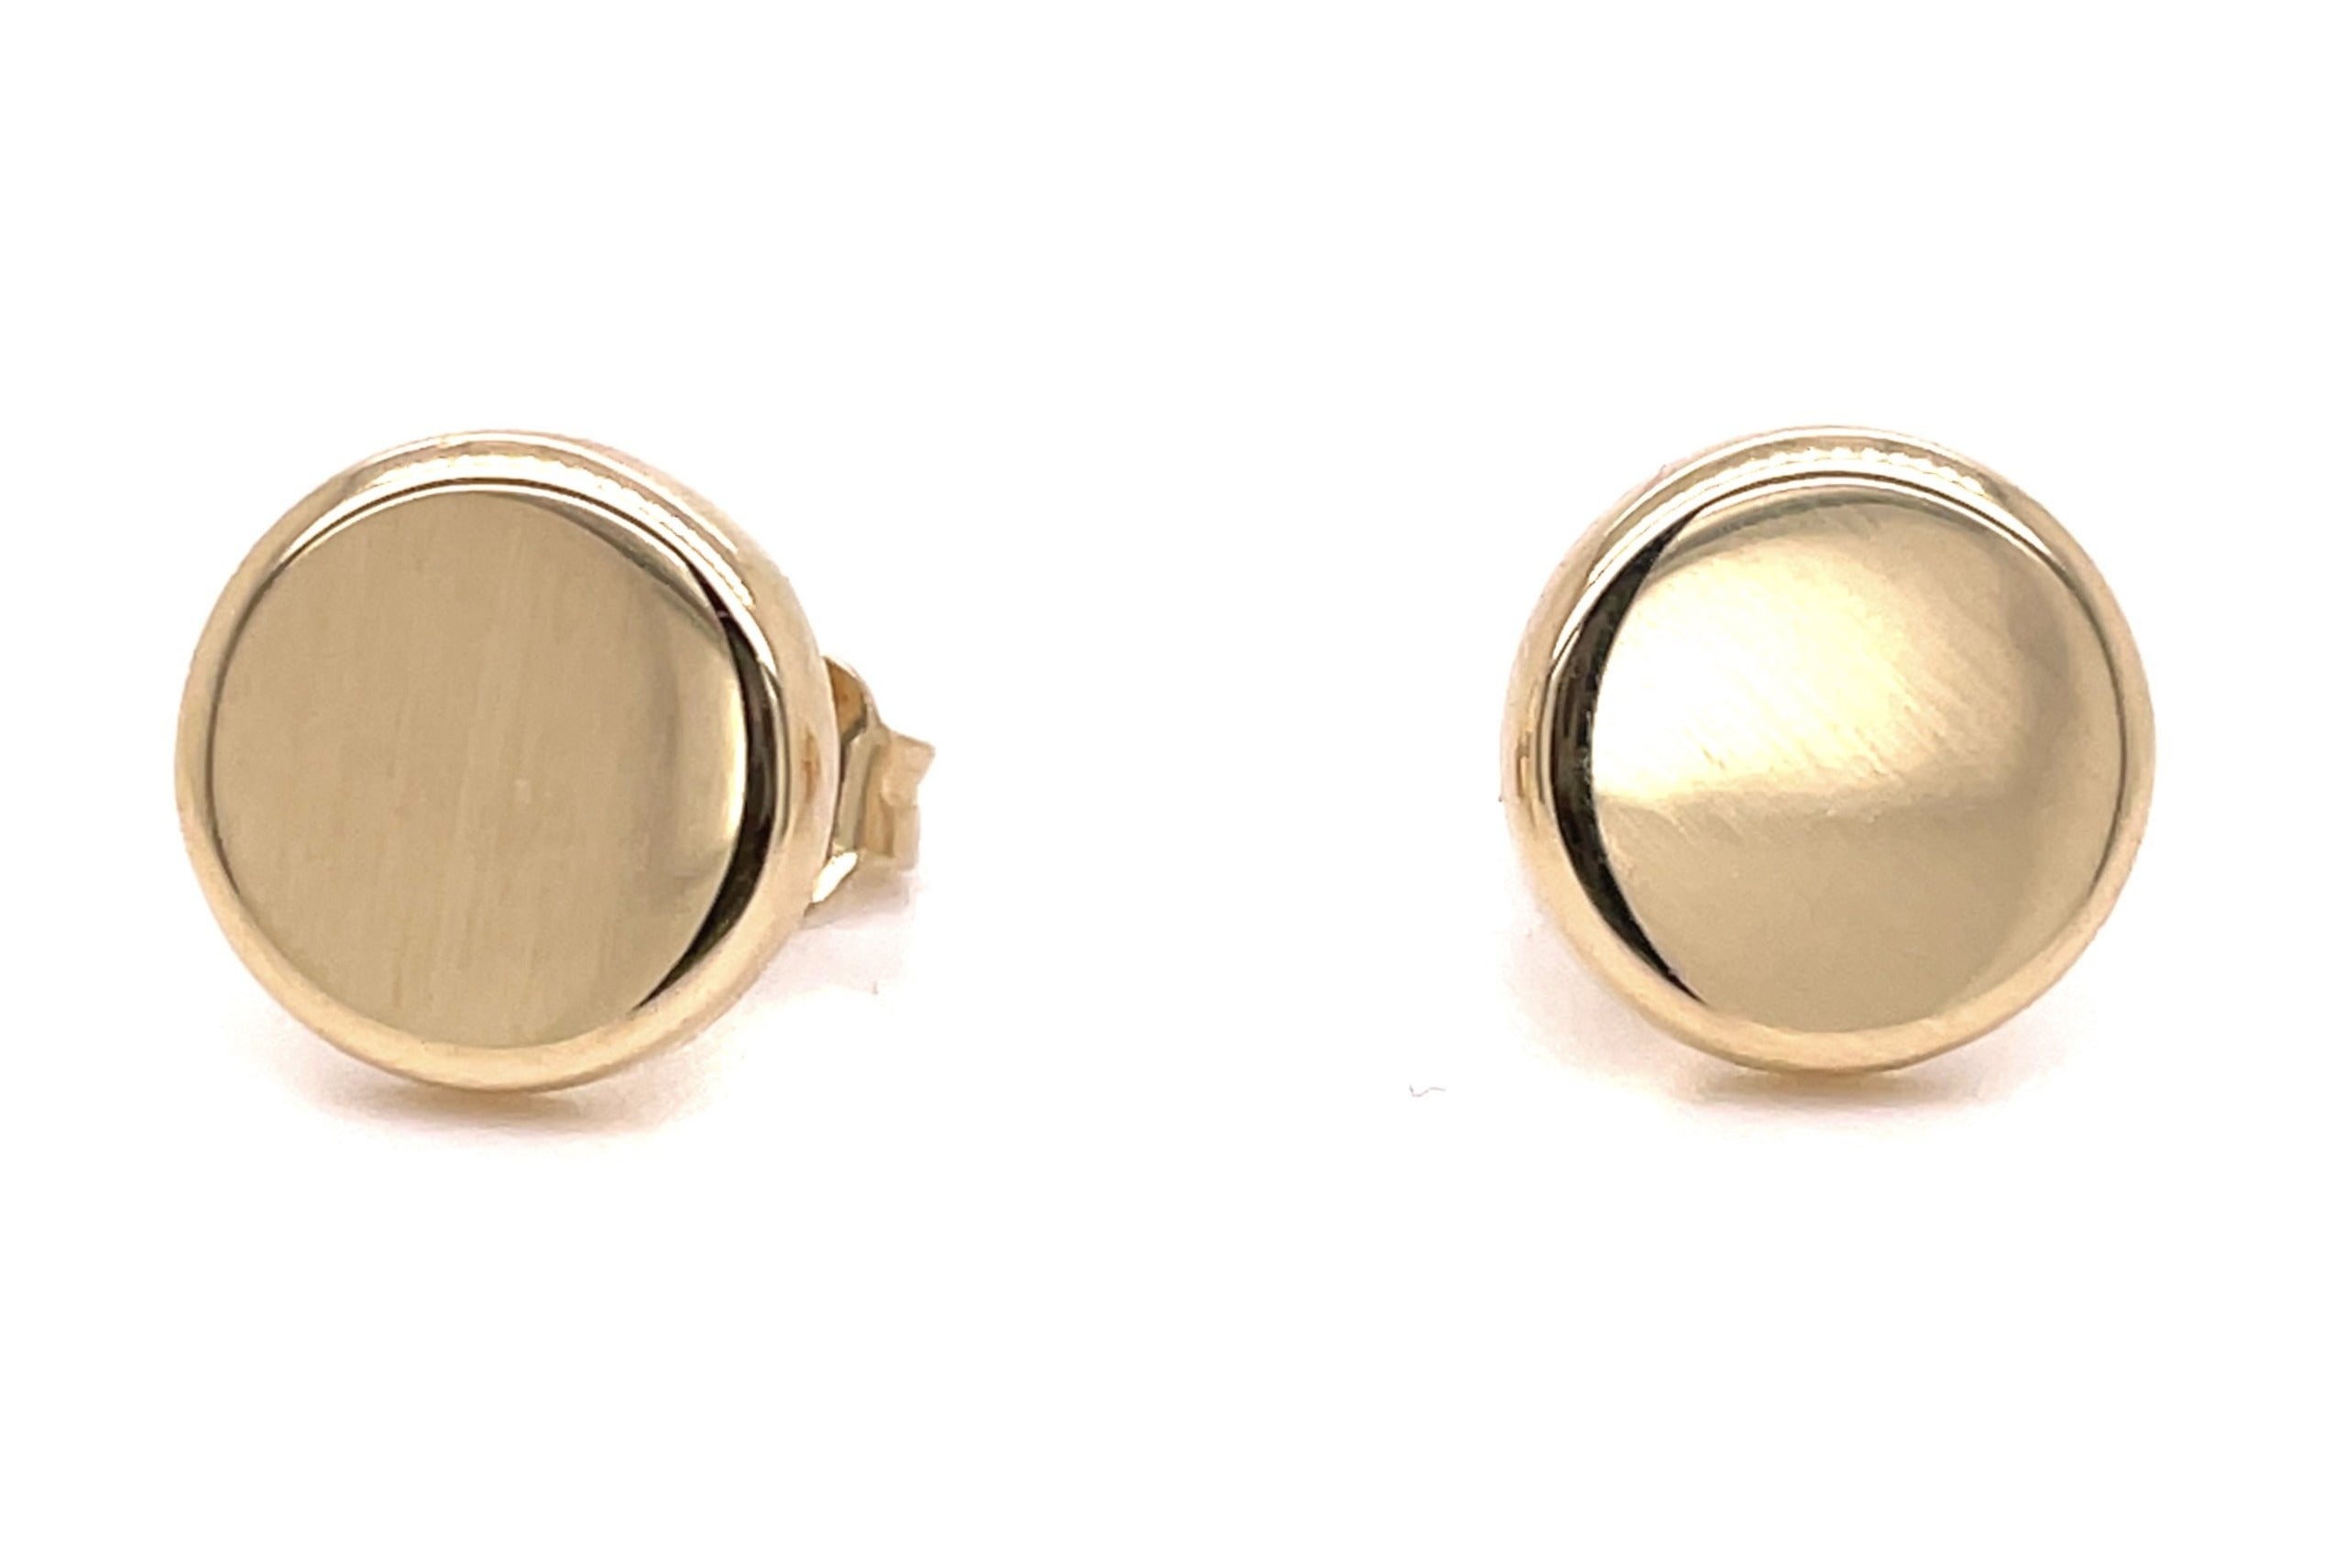 These stud earrings are made with 14k yellow gold and an Italian-made secure friction back for ultimate security. The 8.50 mm flat round designs offer timeless elegance.